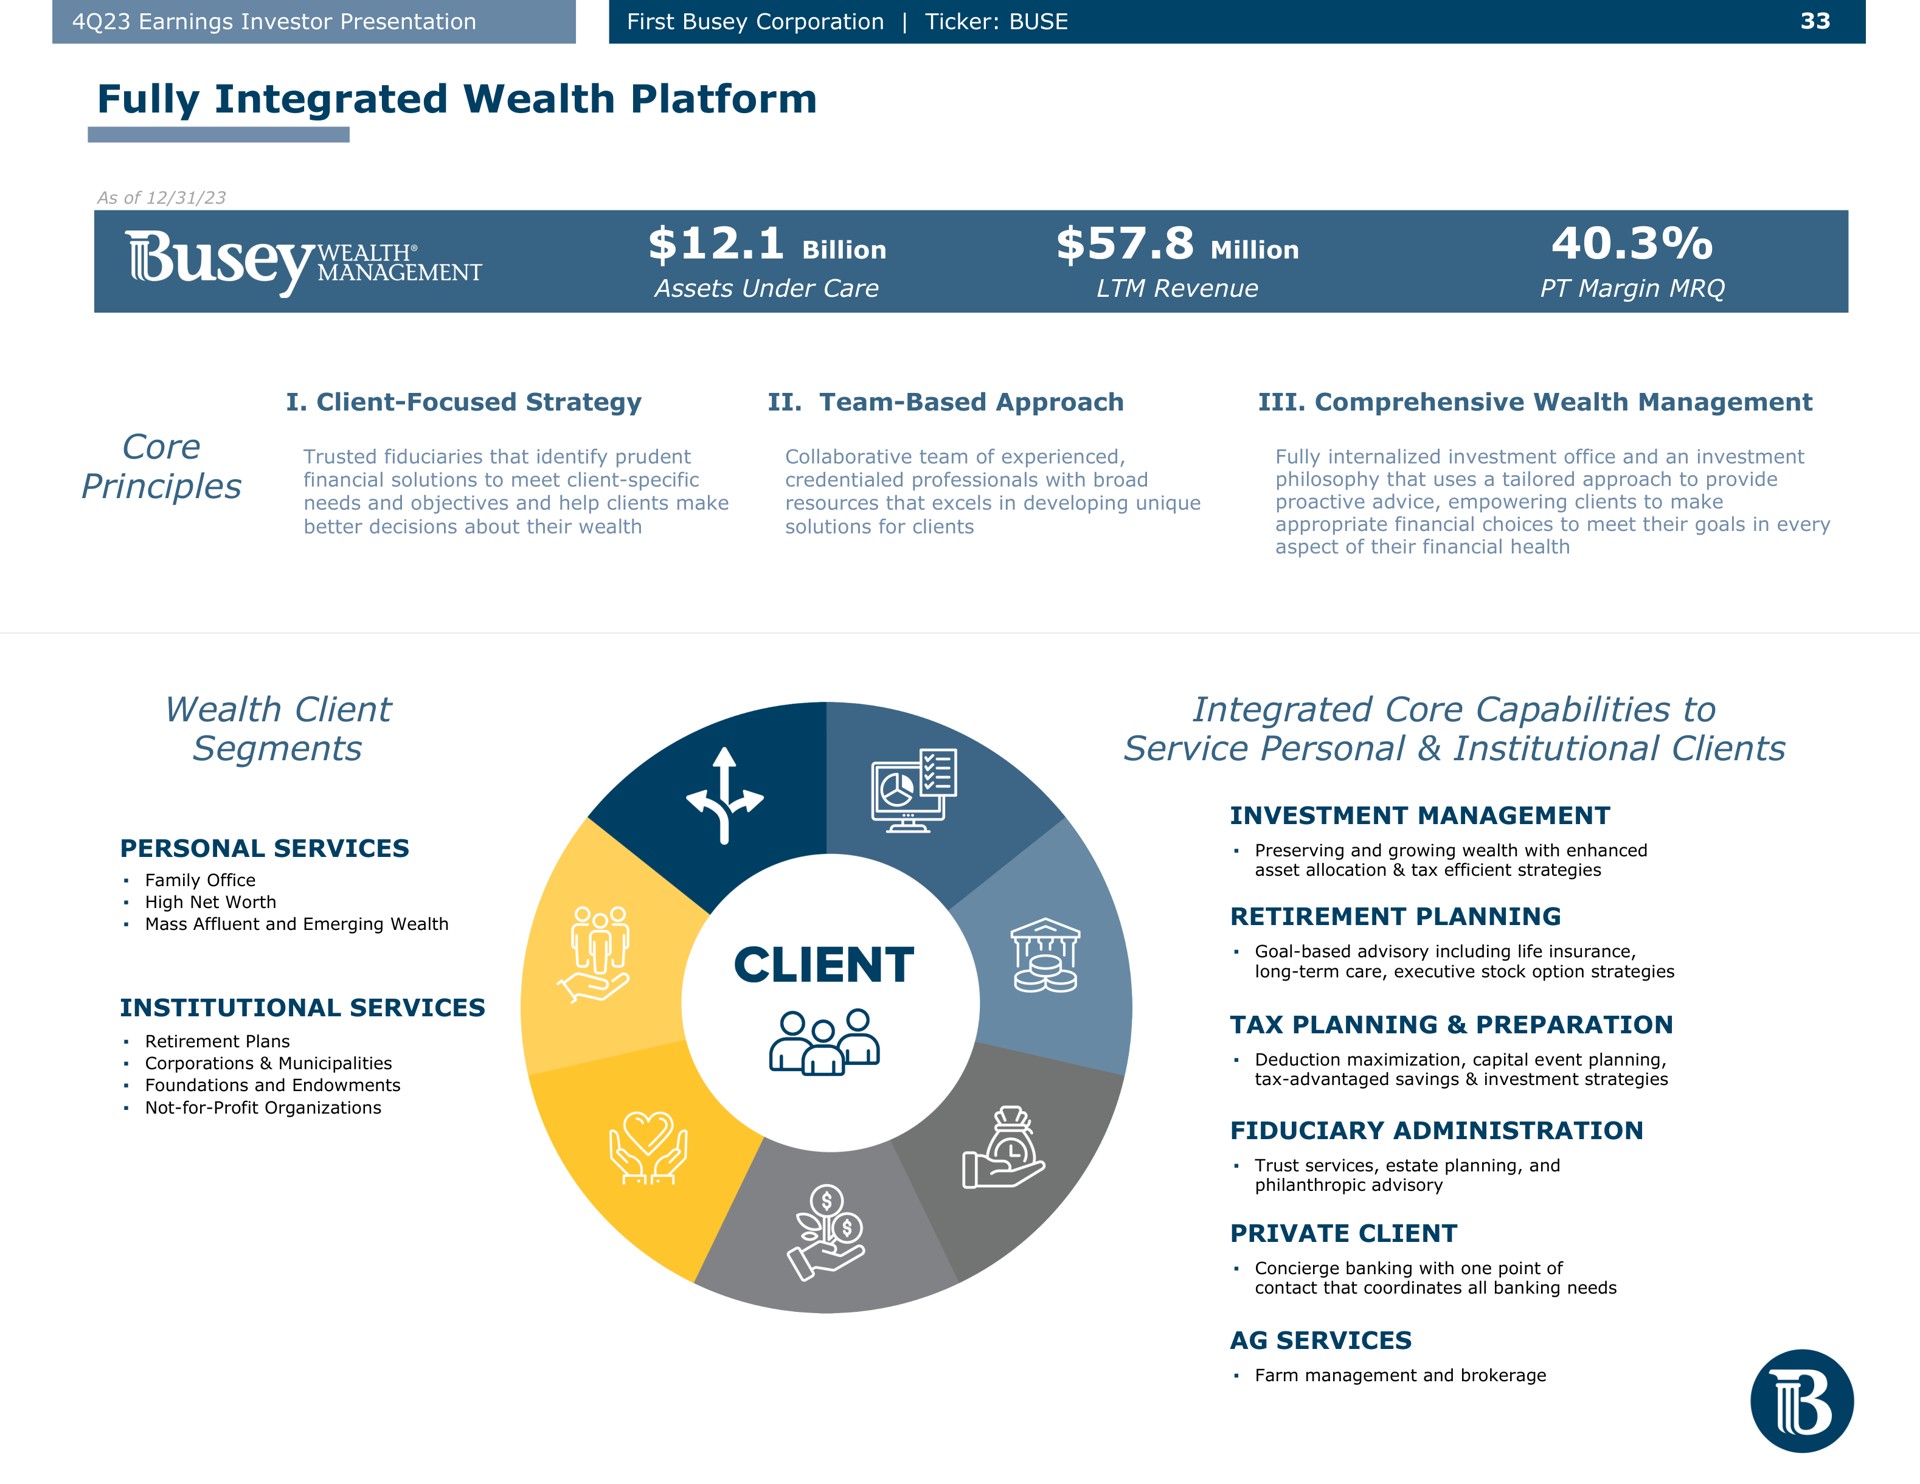 fully integrated wealth platform core principles wealth client segments integrated core capabilities to service personal institutional clients use inion leas assets under care revenue margin | First Busey